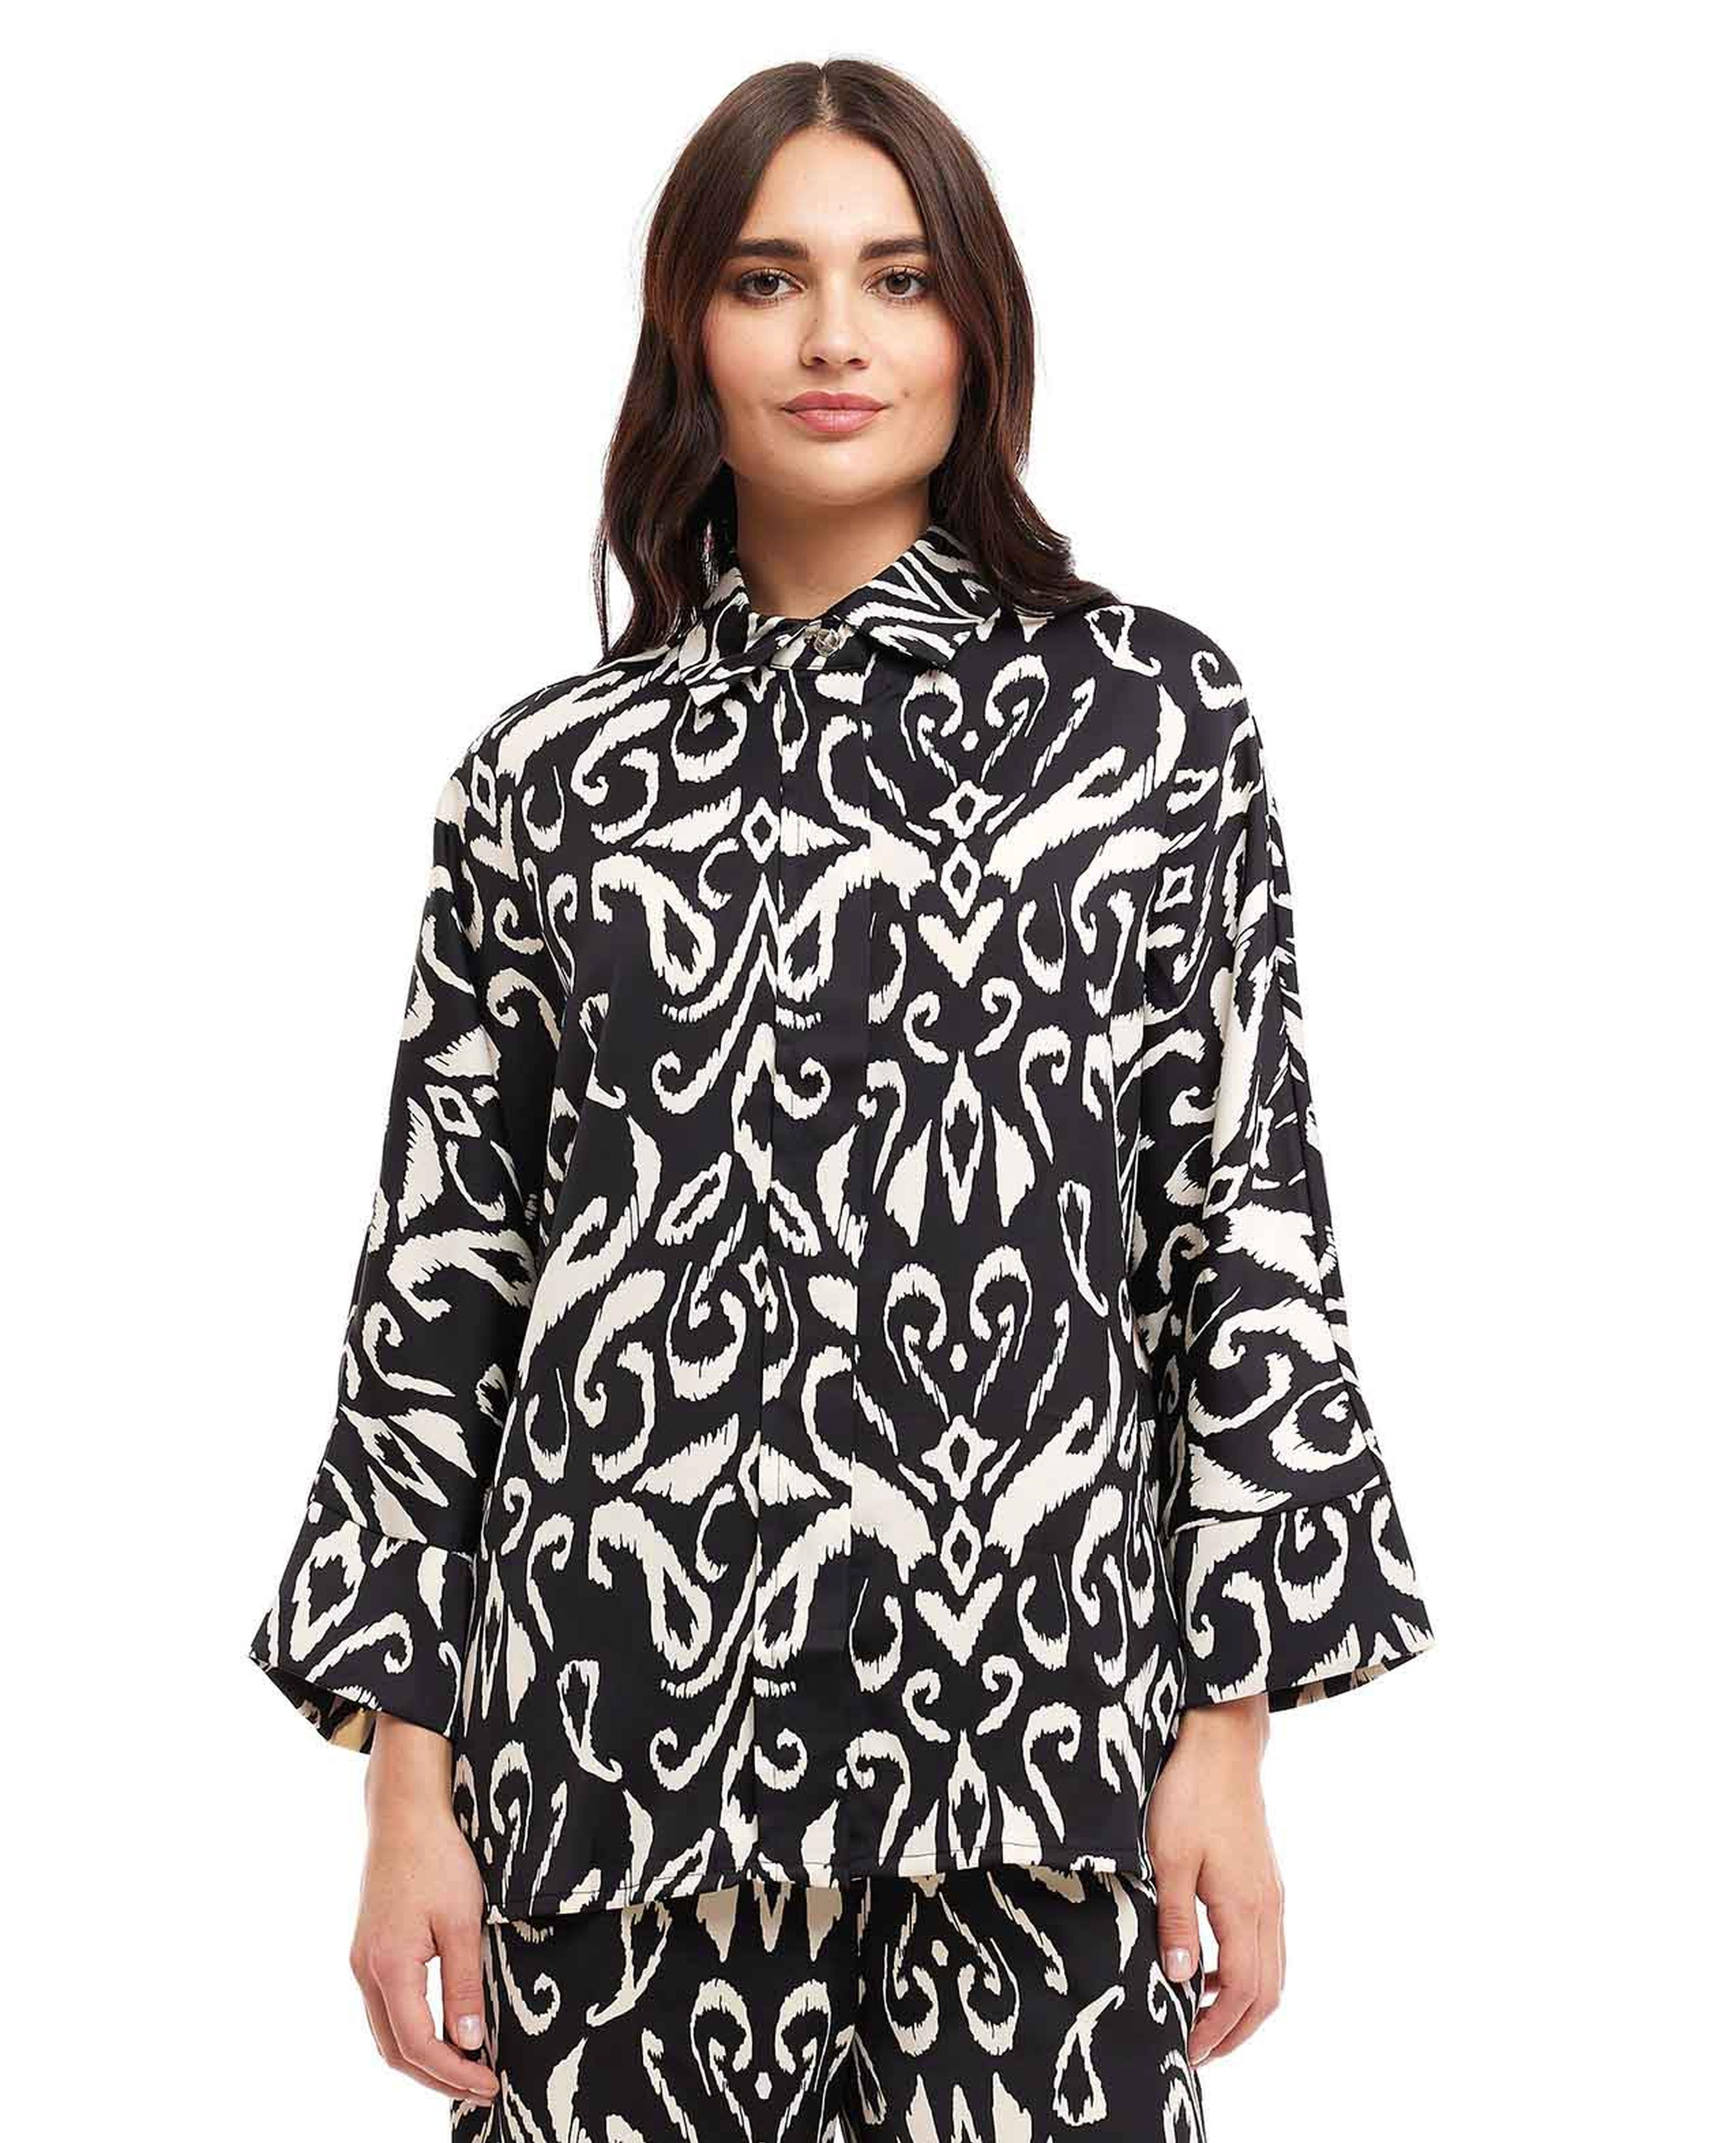 Patterned Tunic with Spread Collar and Long Sleeves